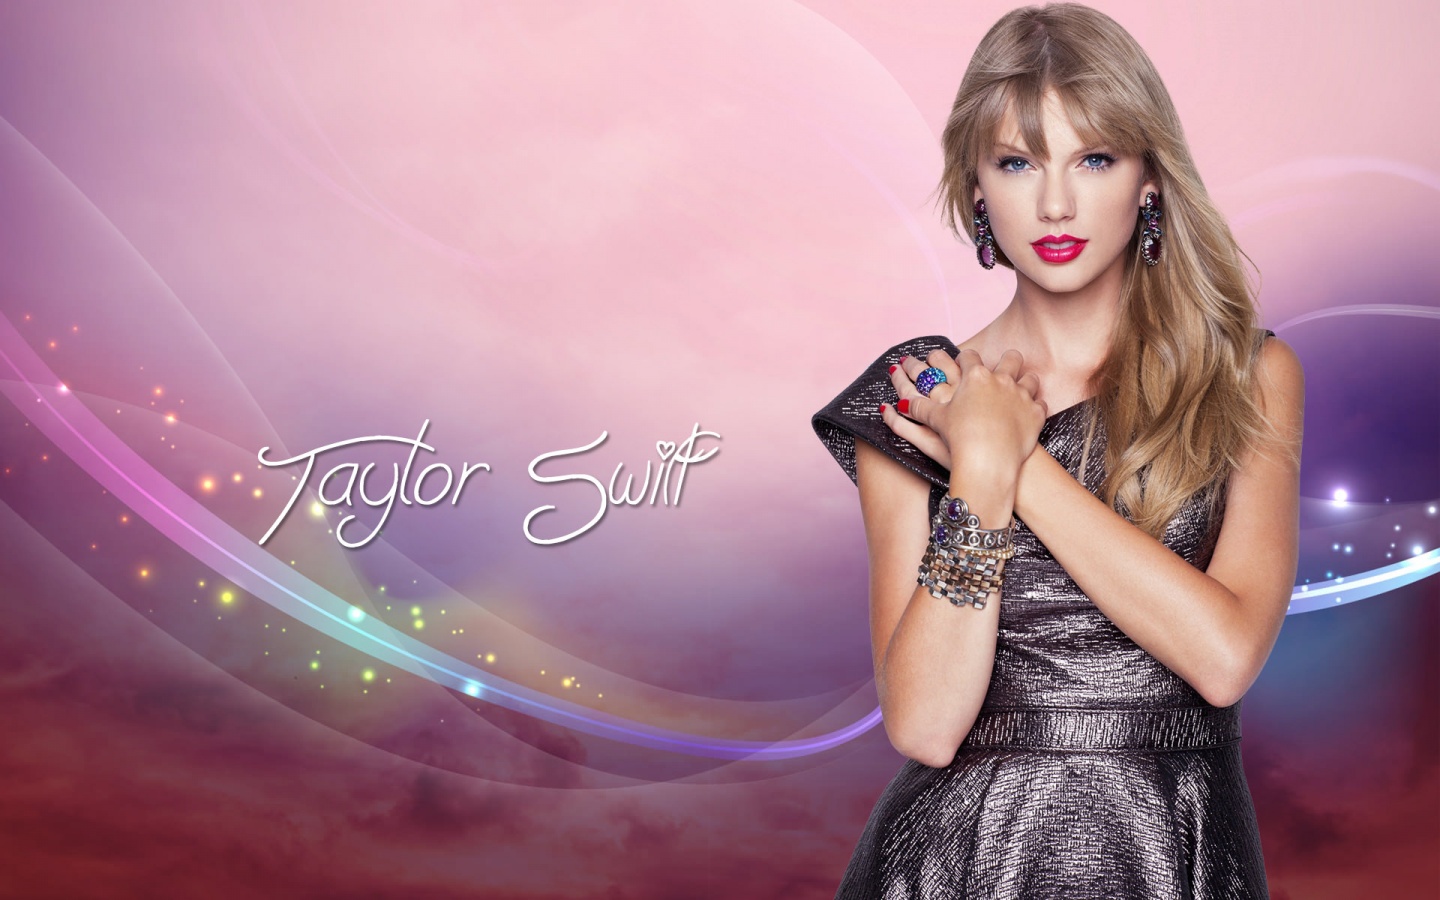 Free Download Taylor Swift Computer Wallpapers Desktop Backgrounds 1440x900 Id 1440x900 For Your Desktop Mobile Tablet Explore 49 Taylor Swift Wallpaper For Computer Best Taylor Swift Wallpapers Taylor Swift